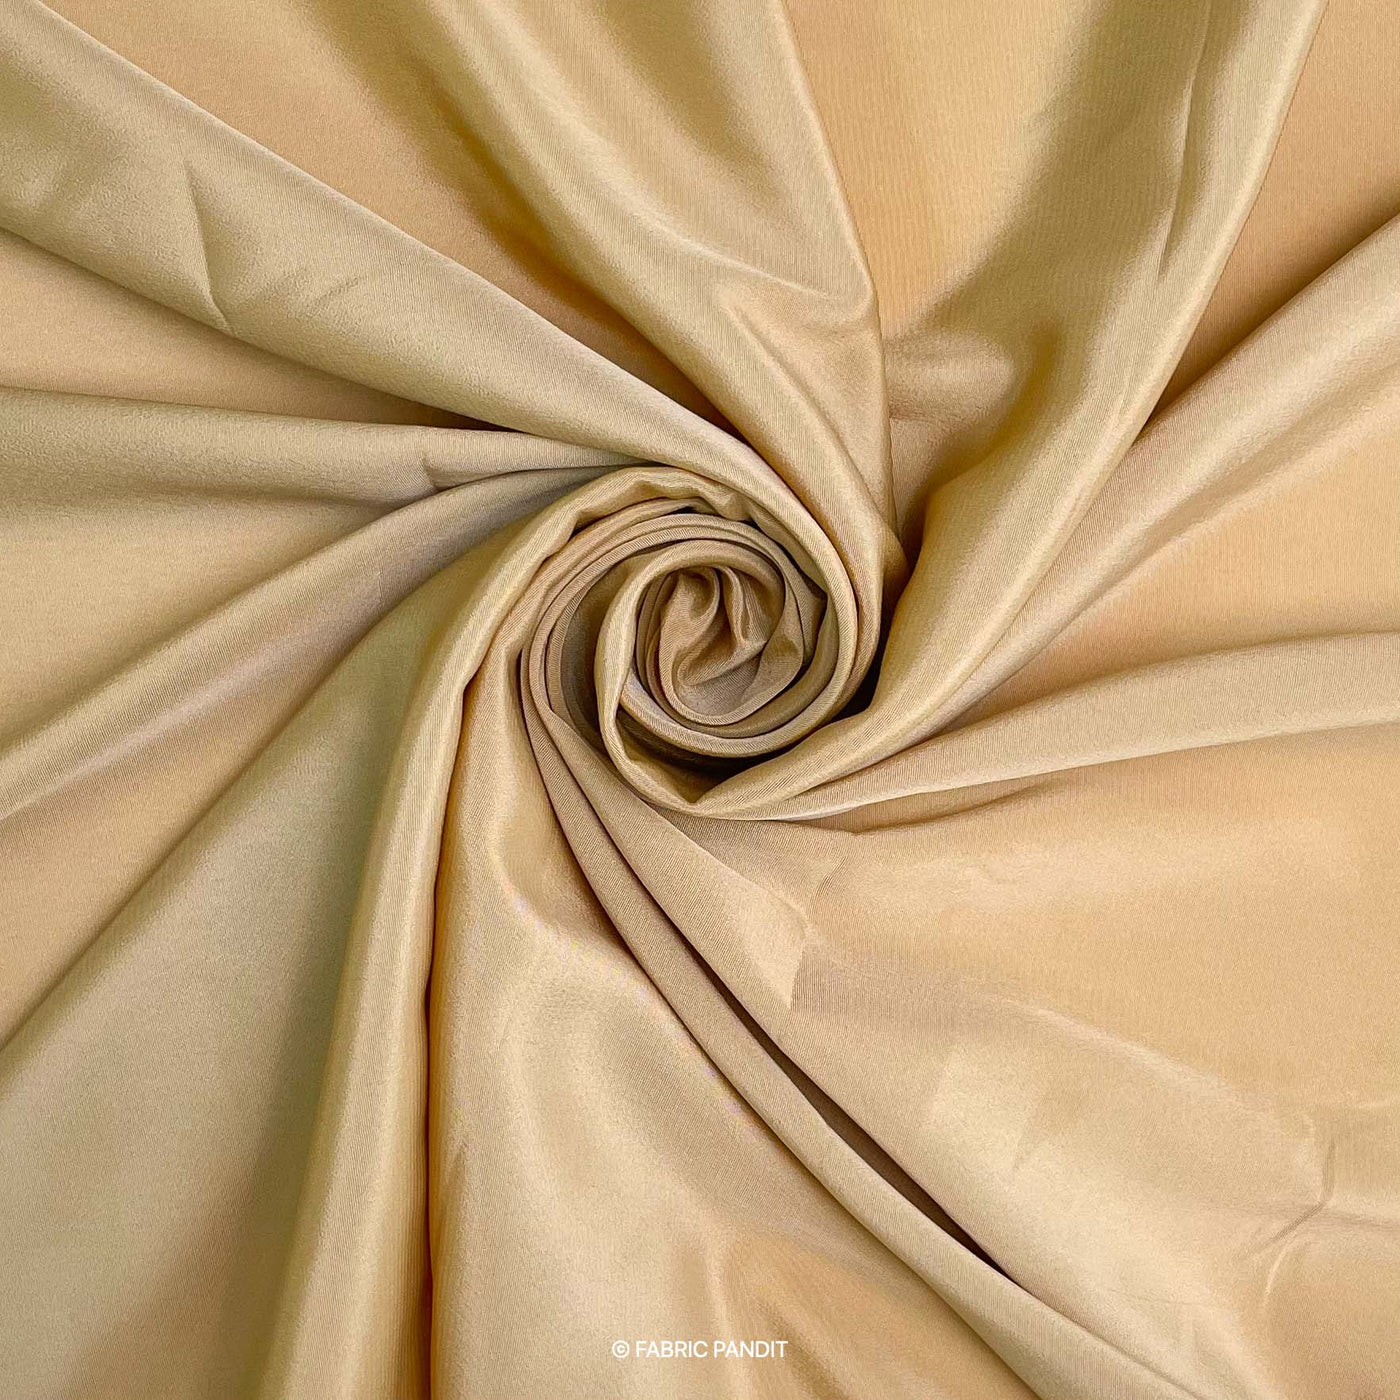 Fabric Pandit Fabric Sand Color Premium French Crepe Fabric (Width 44 inches)